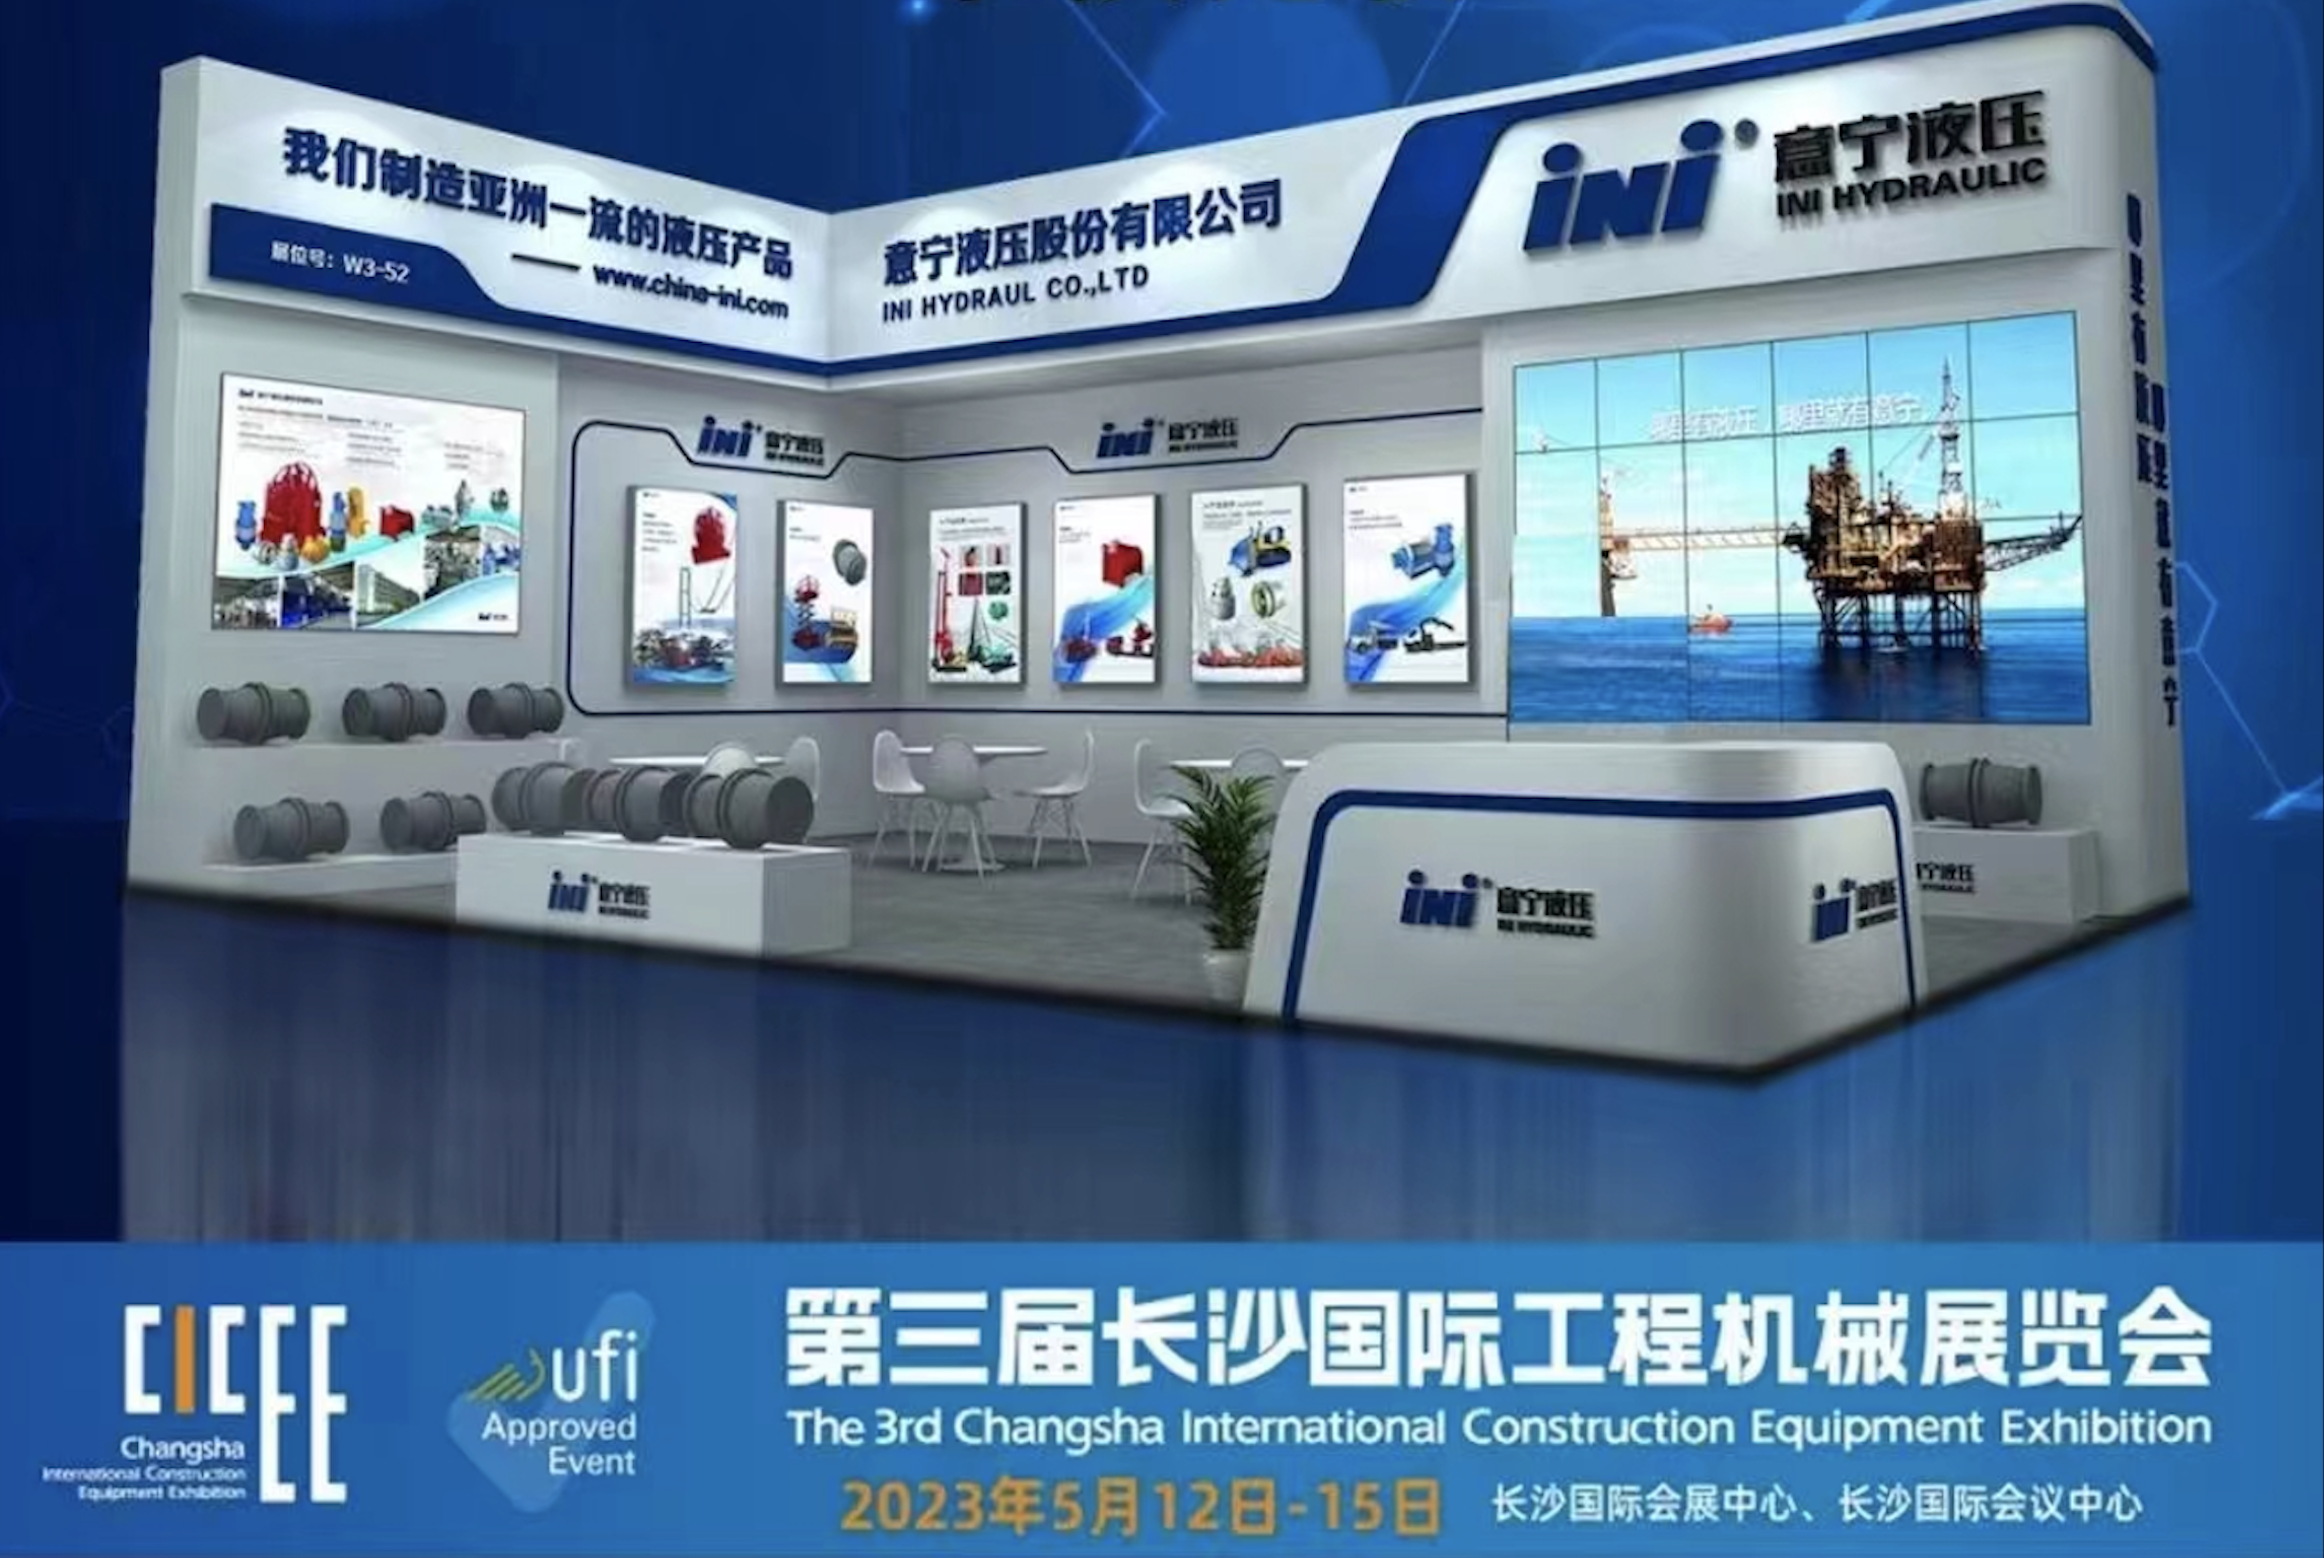 INI Hydraulic’s Invitation: Booth W3-52, The 3rd Changsha International Construction Equipment Exhibition